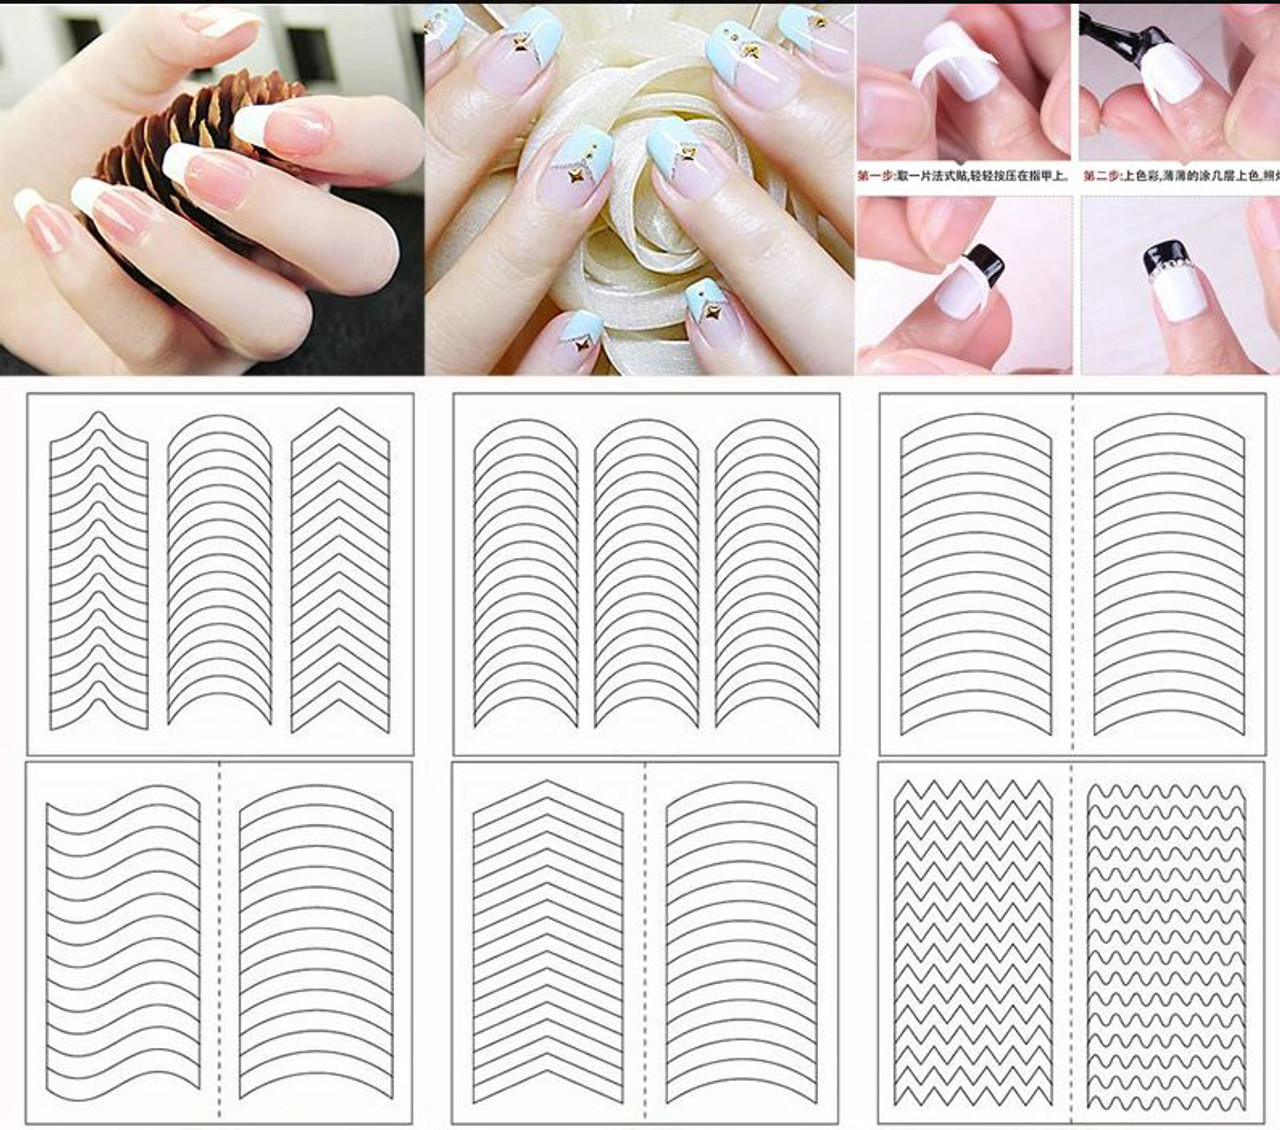 NDI beauty French Manicure Tip Guide Stencils - 8 Sheets / 24 Styles Guide